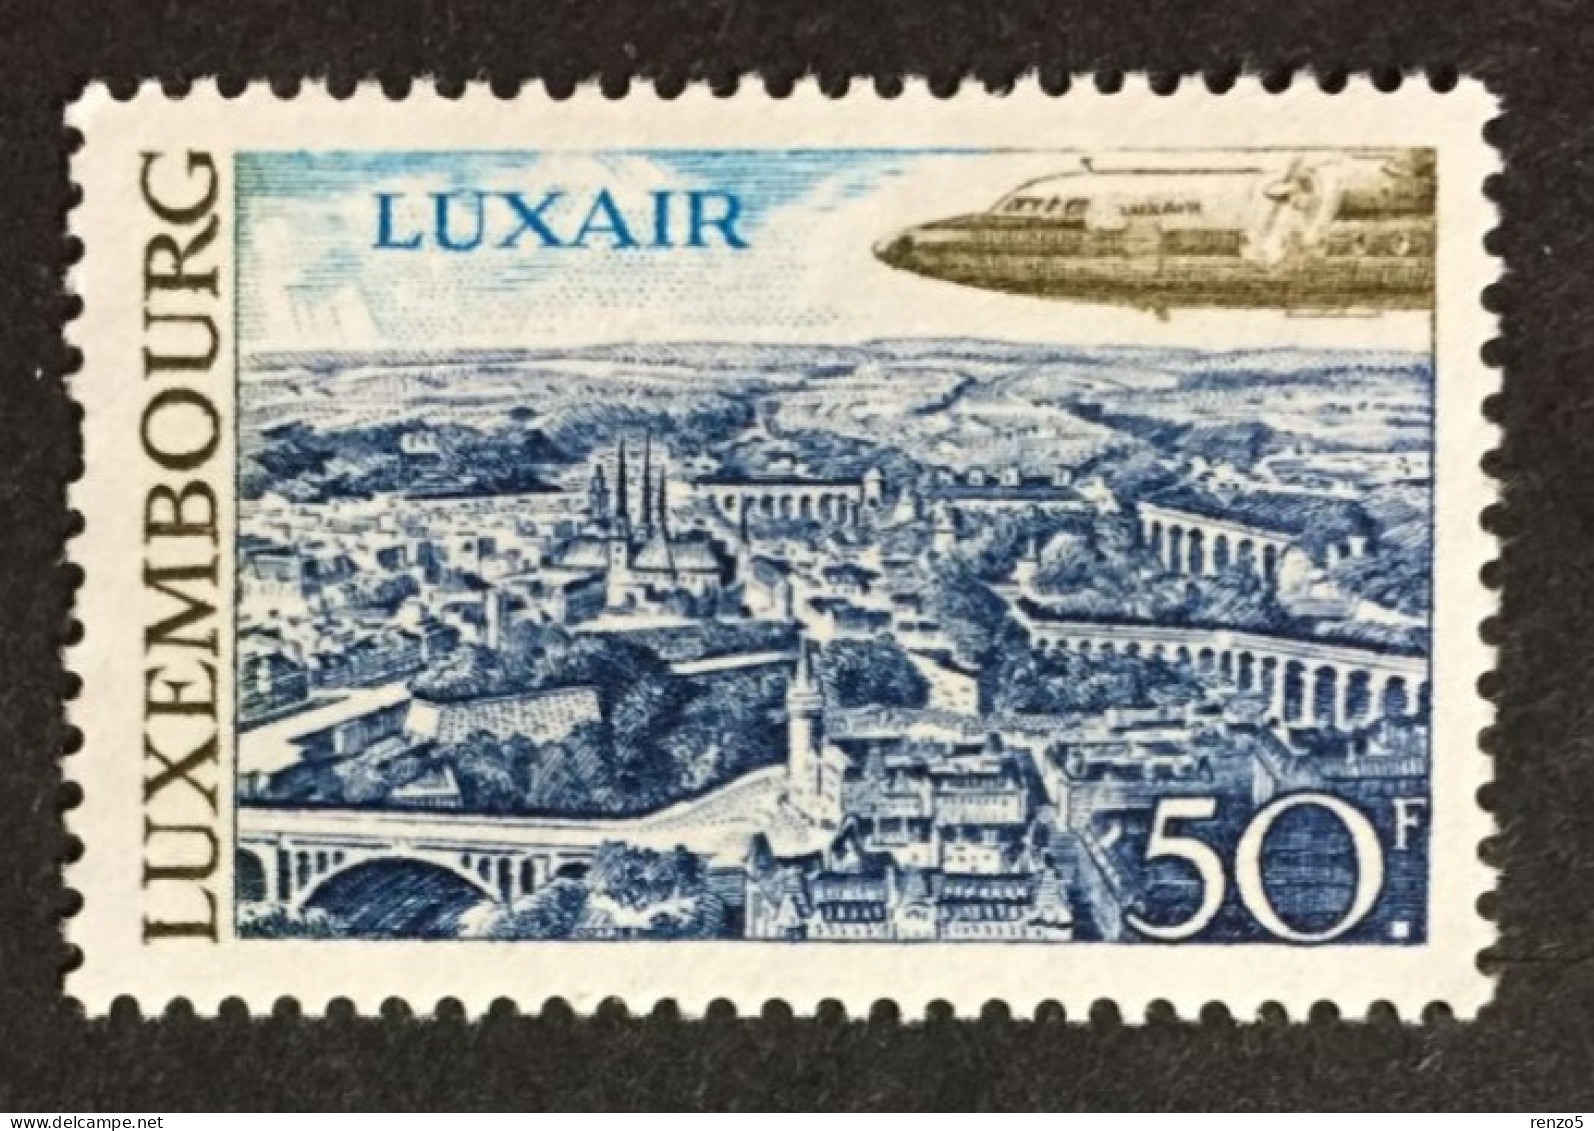 1968 Luxembourg - Tourism Fokker F.27 Friendship Over Luxembourg - Unused ( Imperfect Gum ) - Nuovi